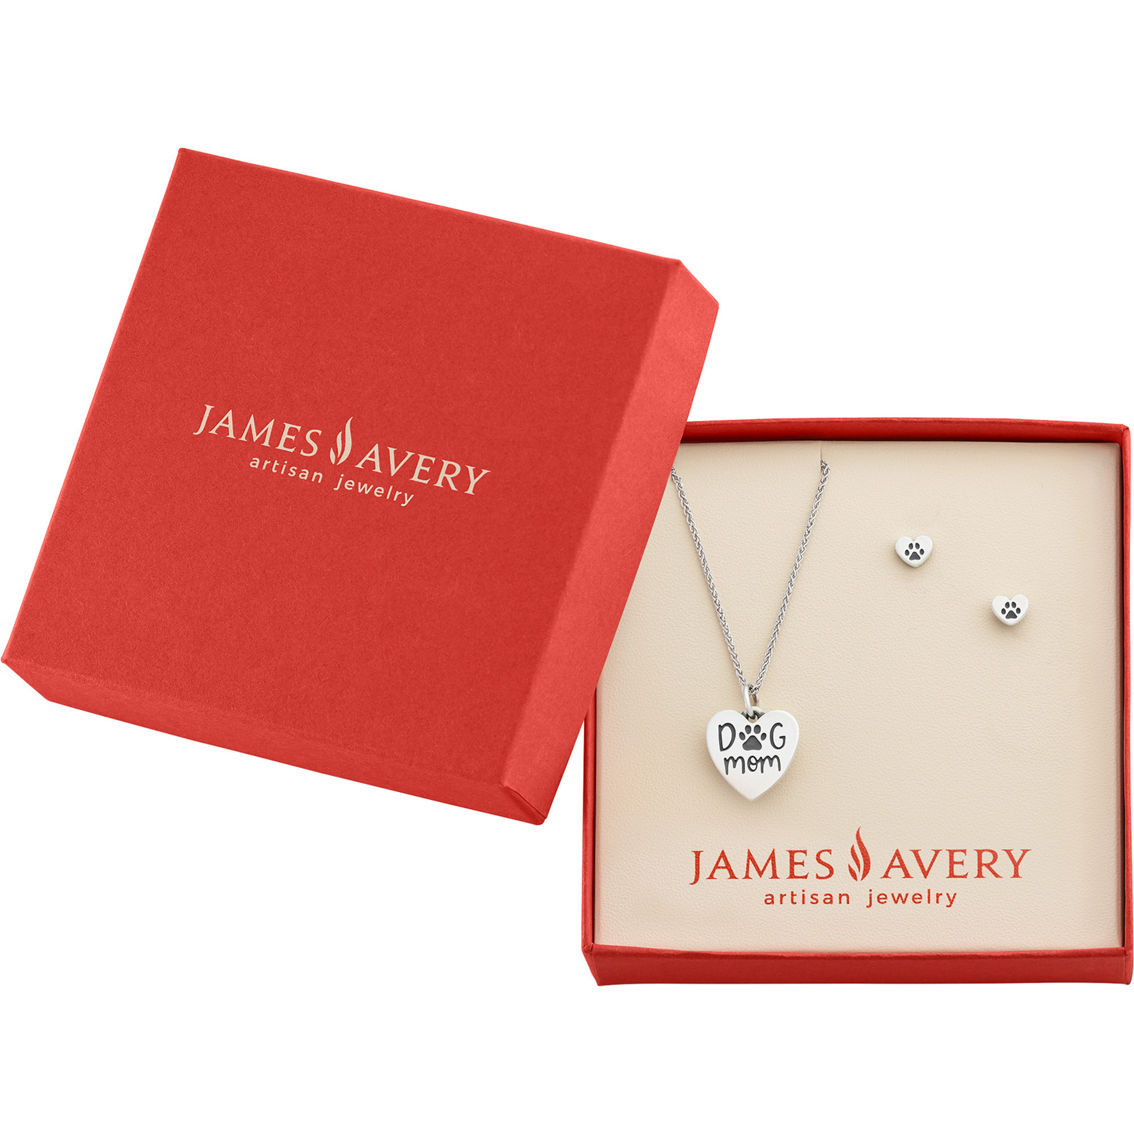 James Avery Dog Mom Gift Set | Silver Necklaces & Pendants | Jewelry ...